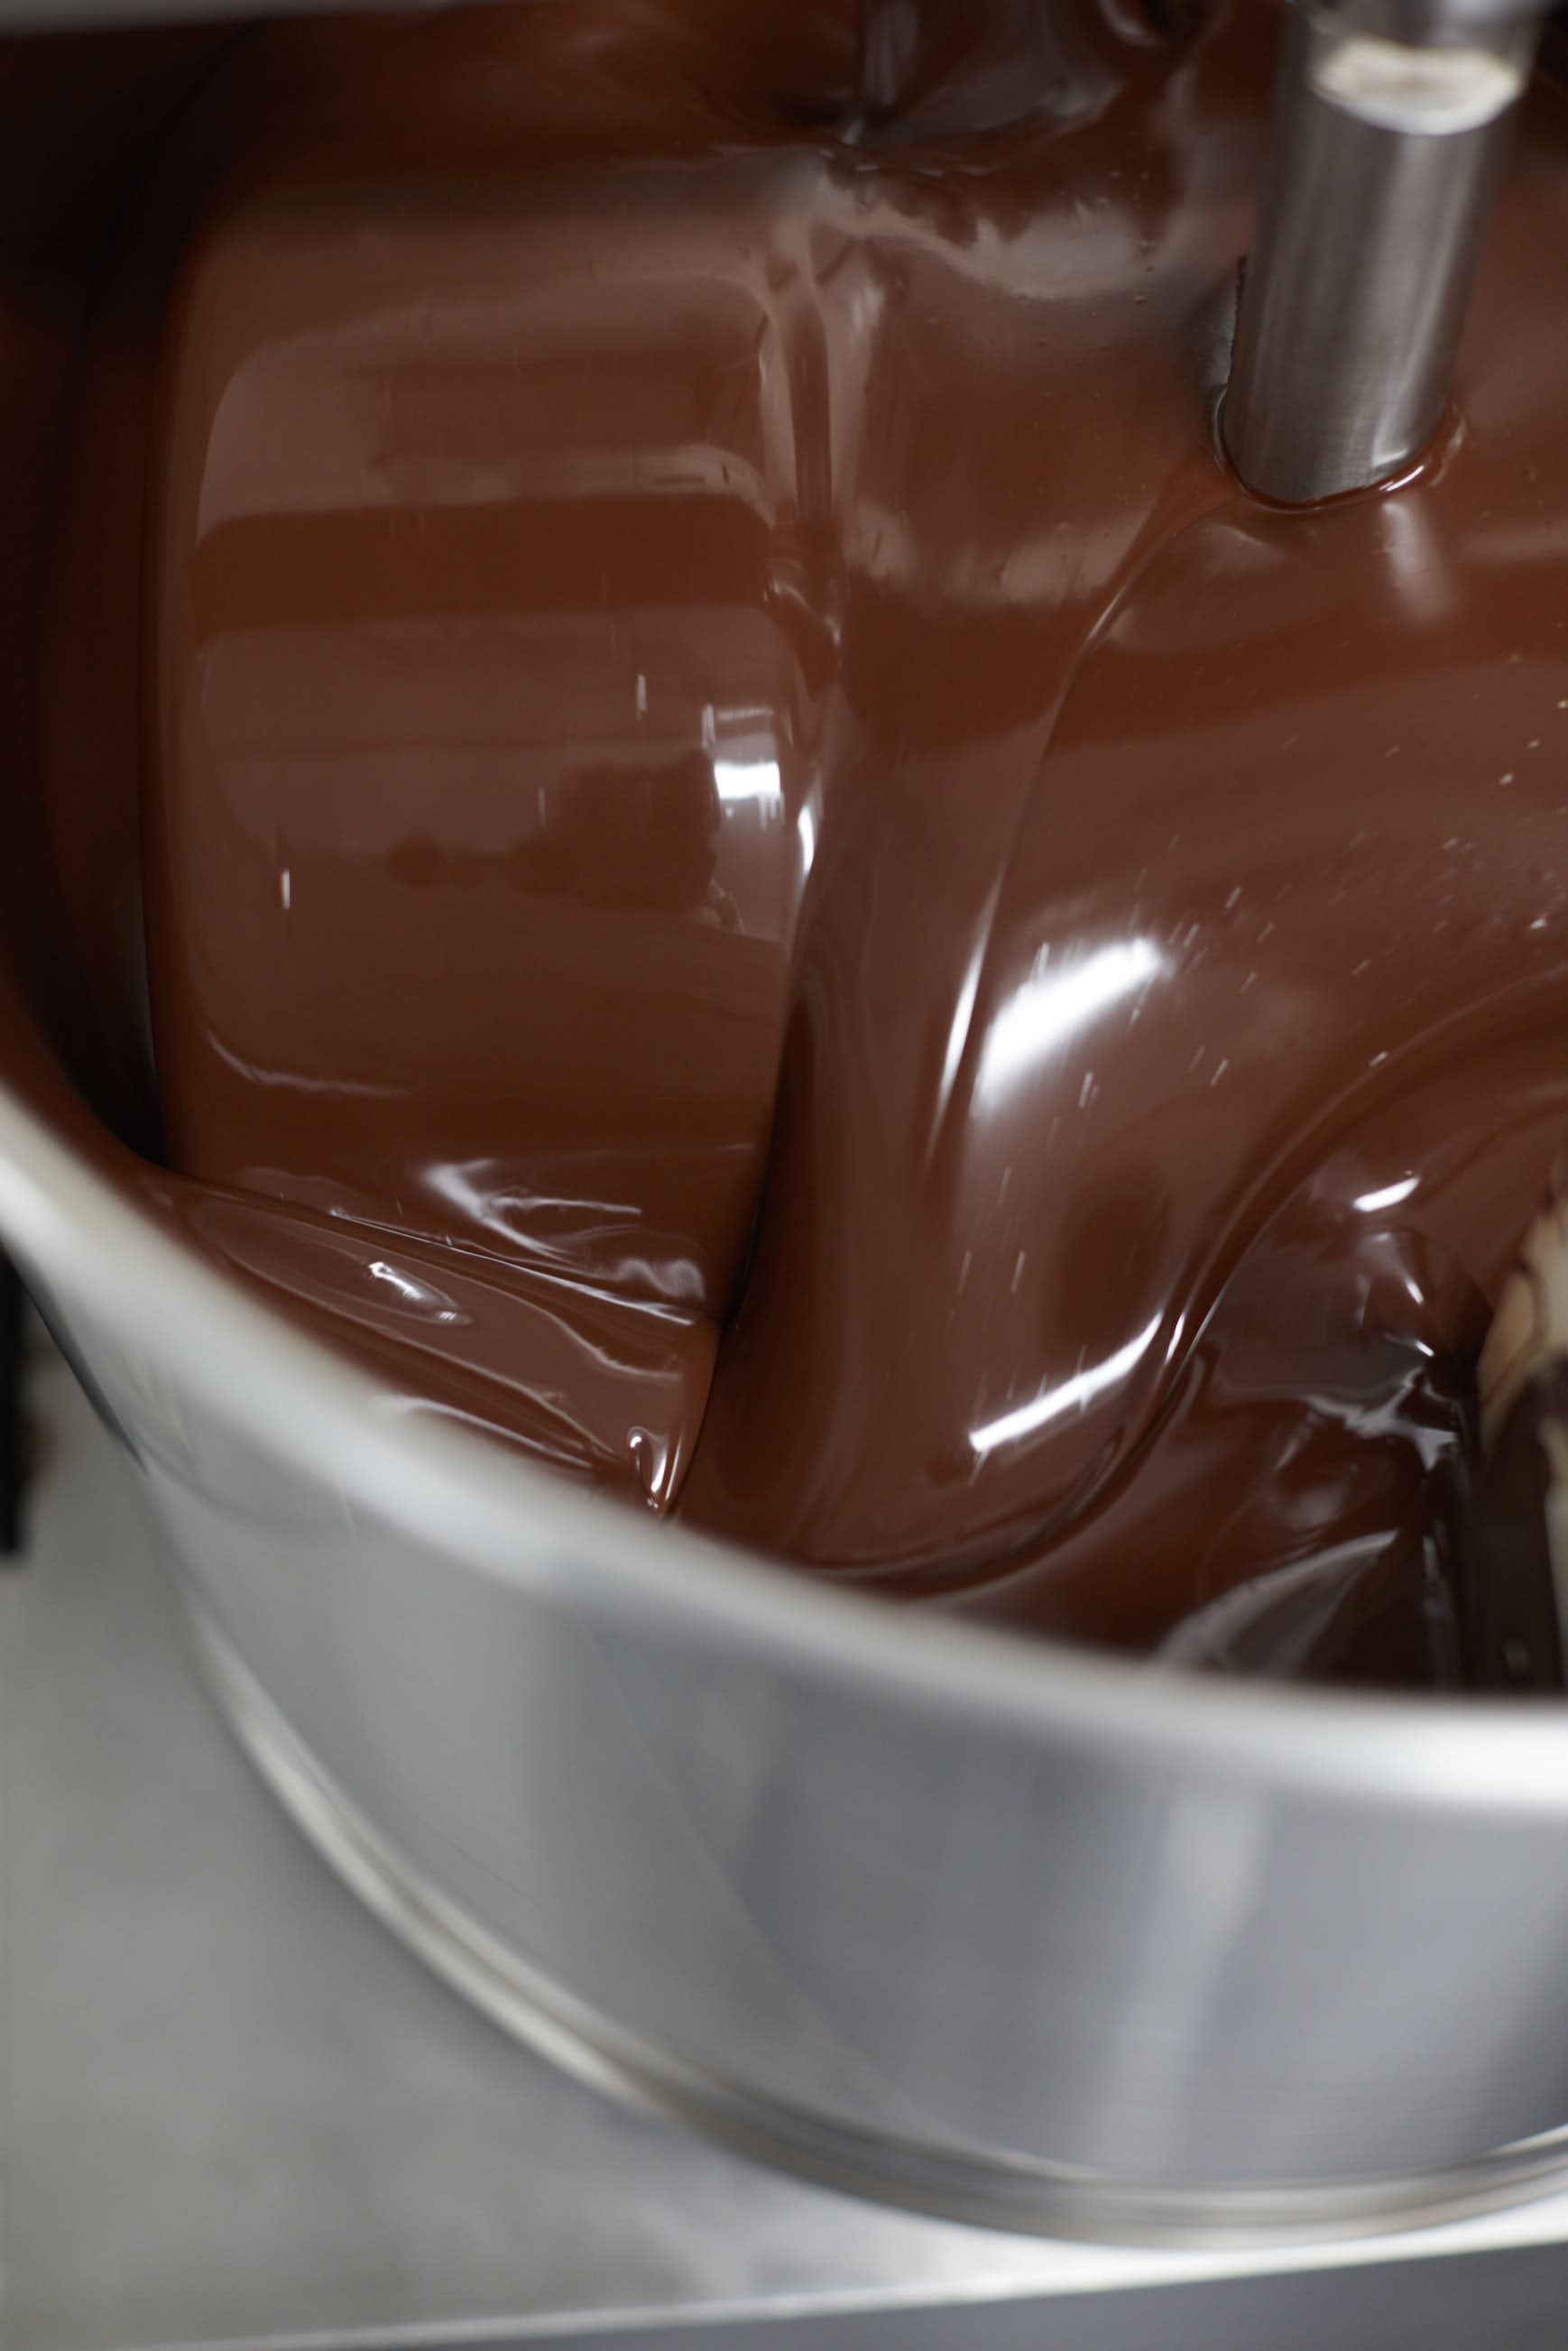 Chocolate being churned